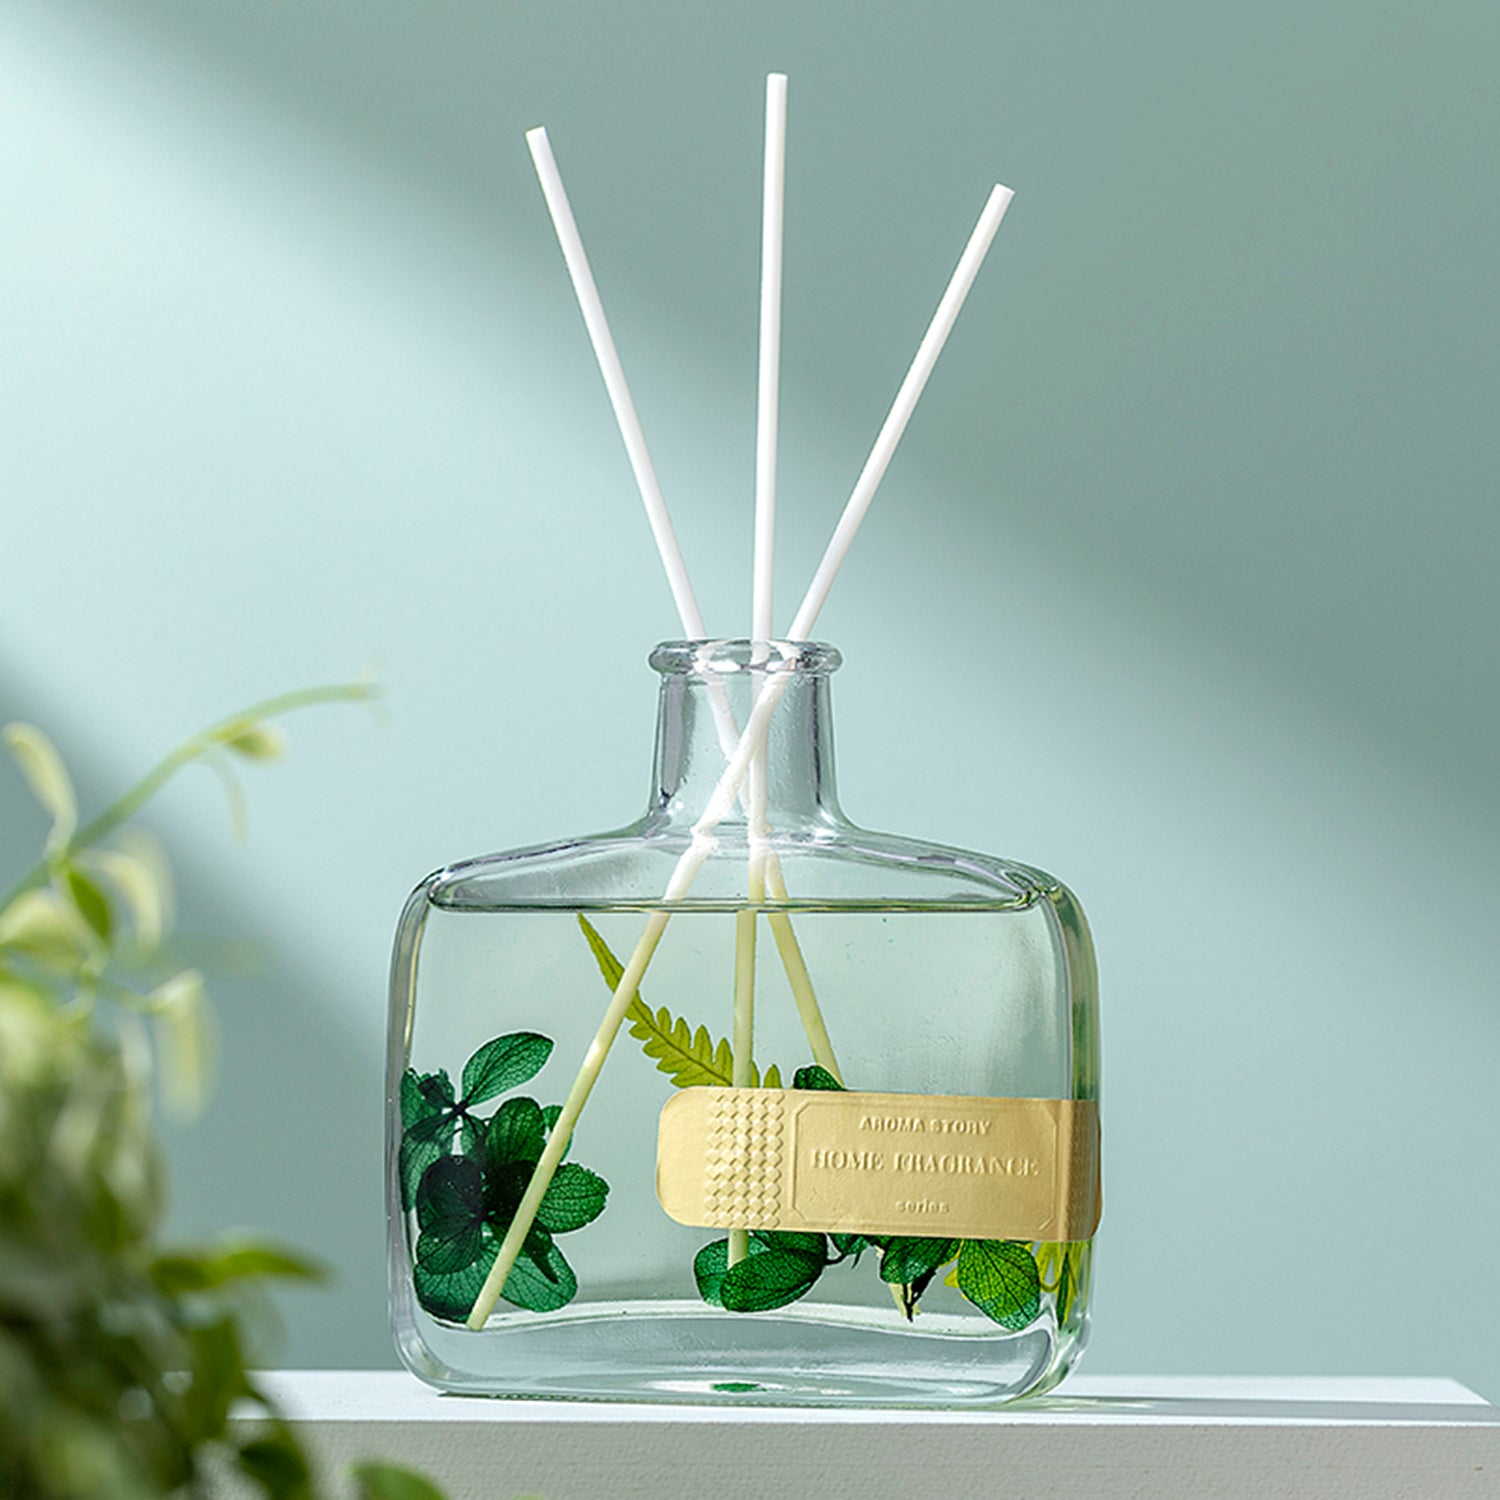 CITTA Dream Series Reed Diffuser Aromatherapy 220ML Premium Essential Oil with Reed Stick and Dry Flower Reed Diffuser CITTA 